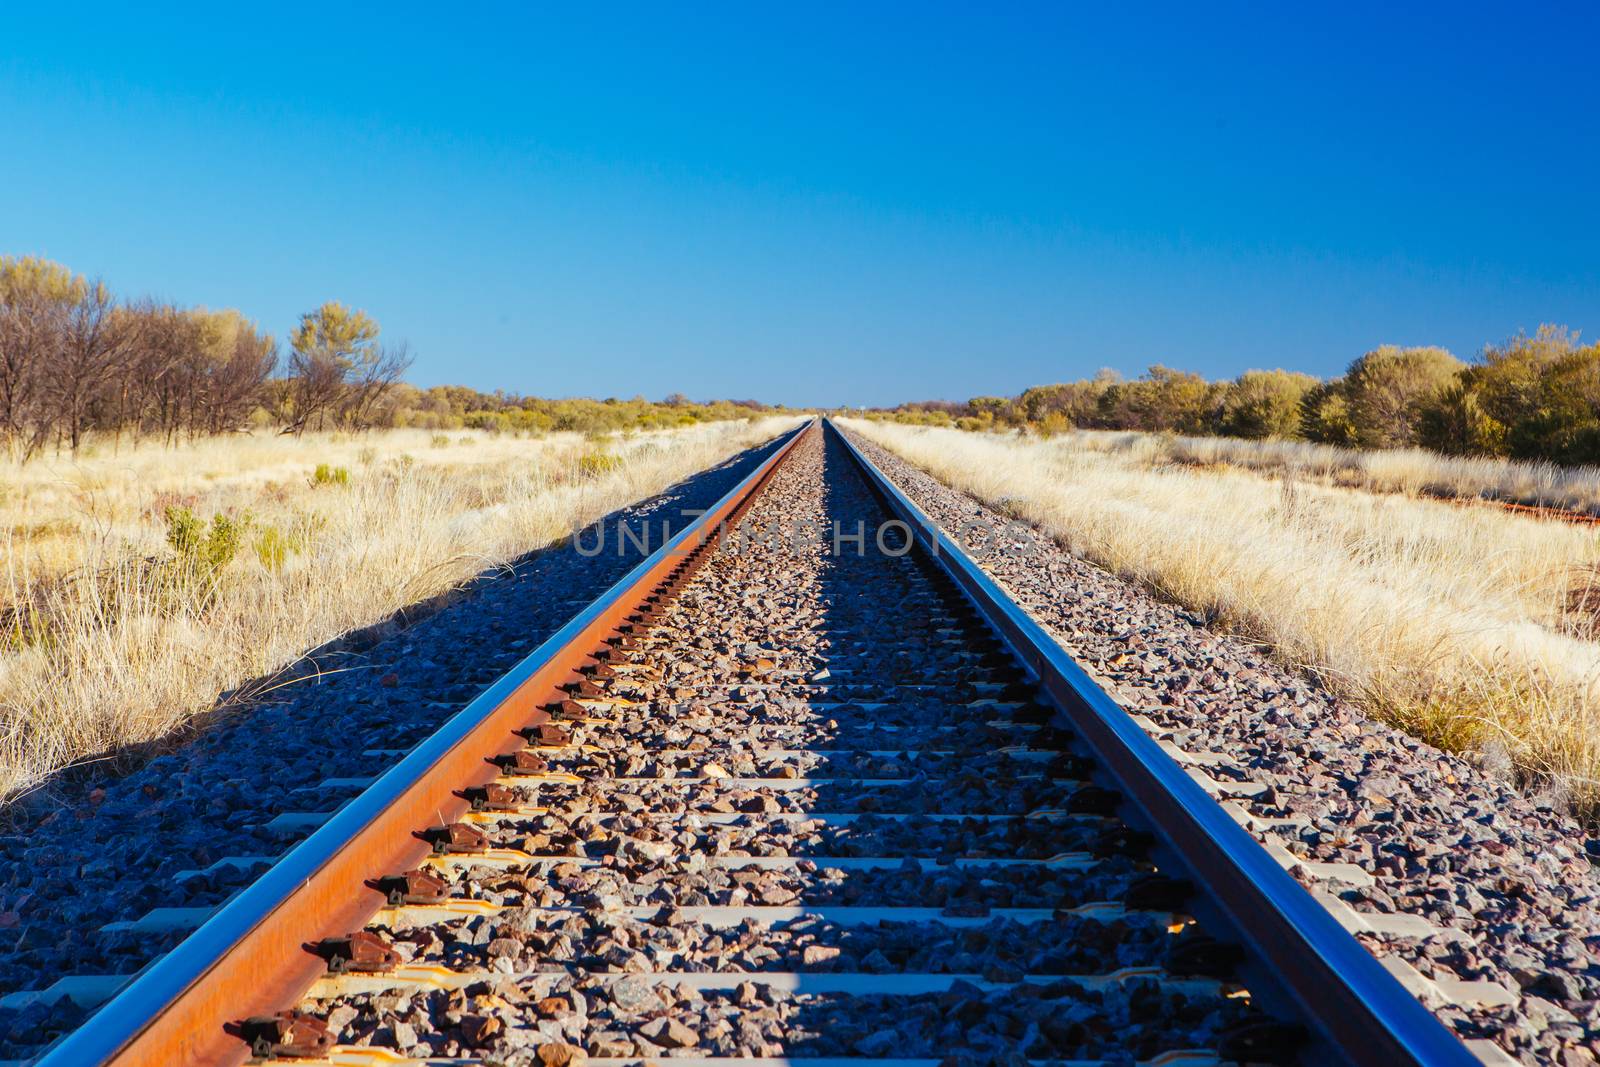 The famous Ghan railway track near Alice Springs extends all the way to Darwin in Northern Territory, Australia